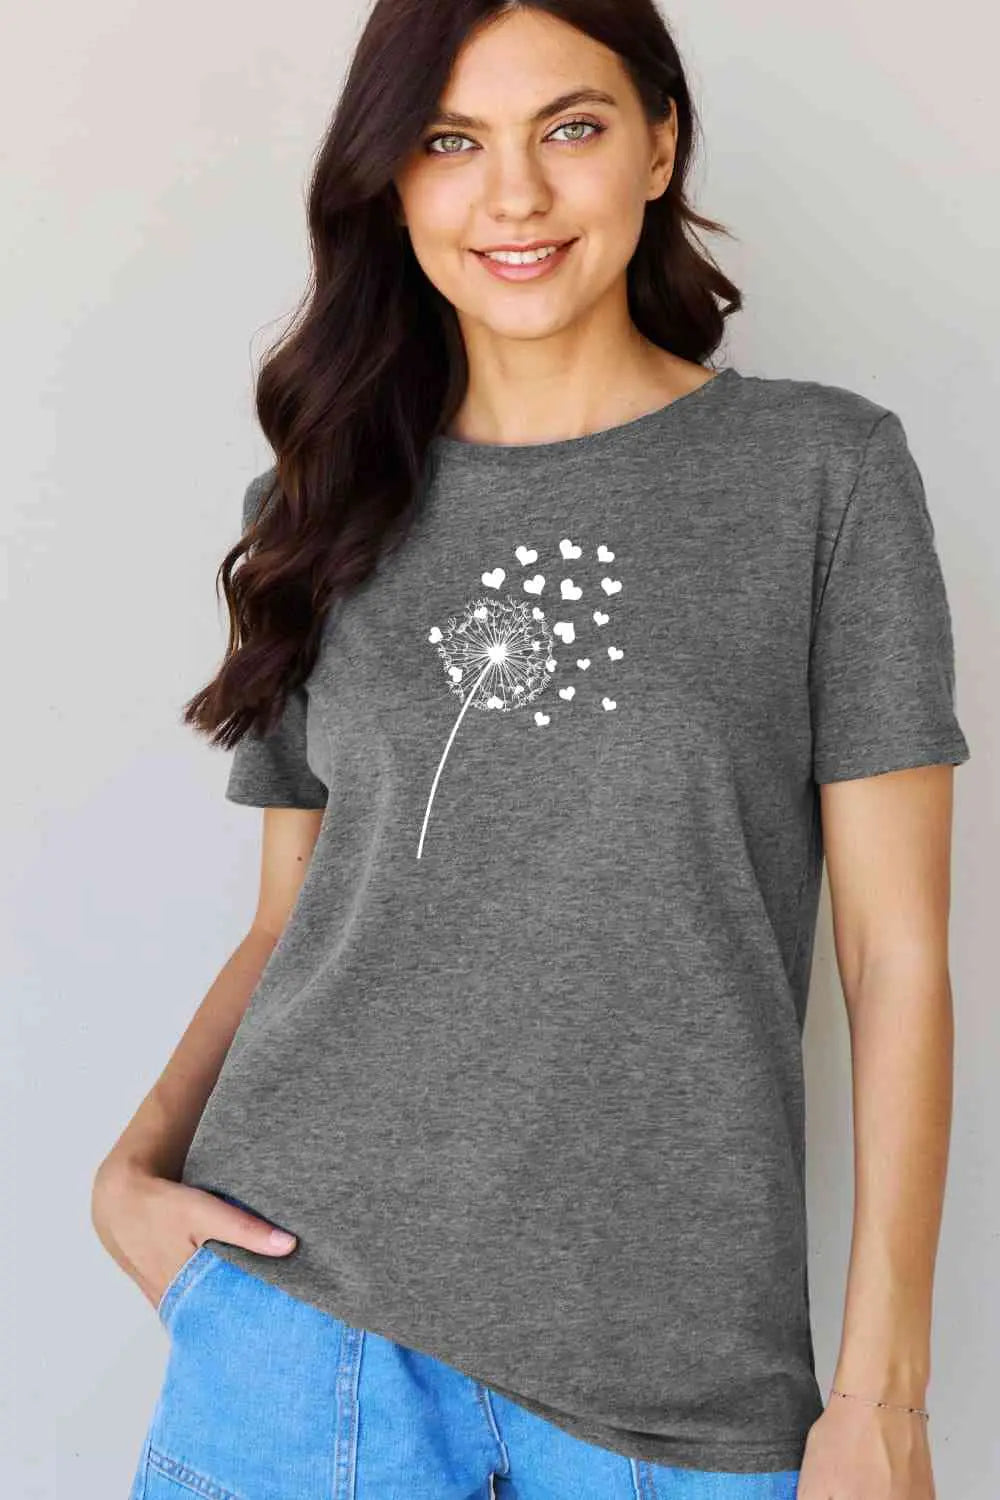 Simply Love Full Size Dandelion Heart Graphic Cotton T-Shirt - Image #9